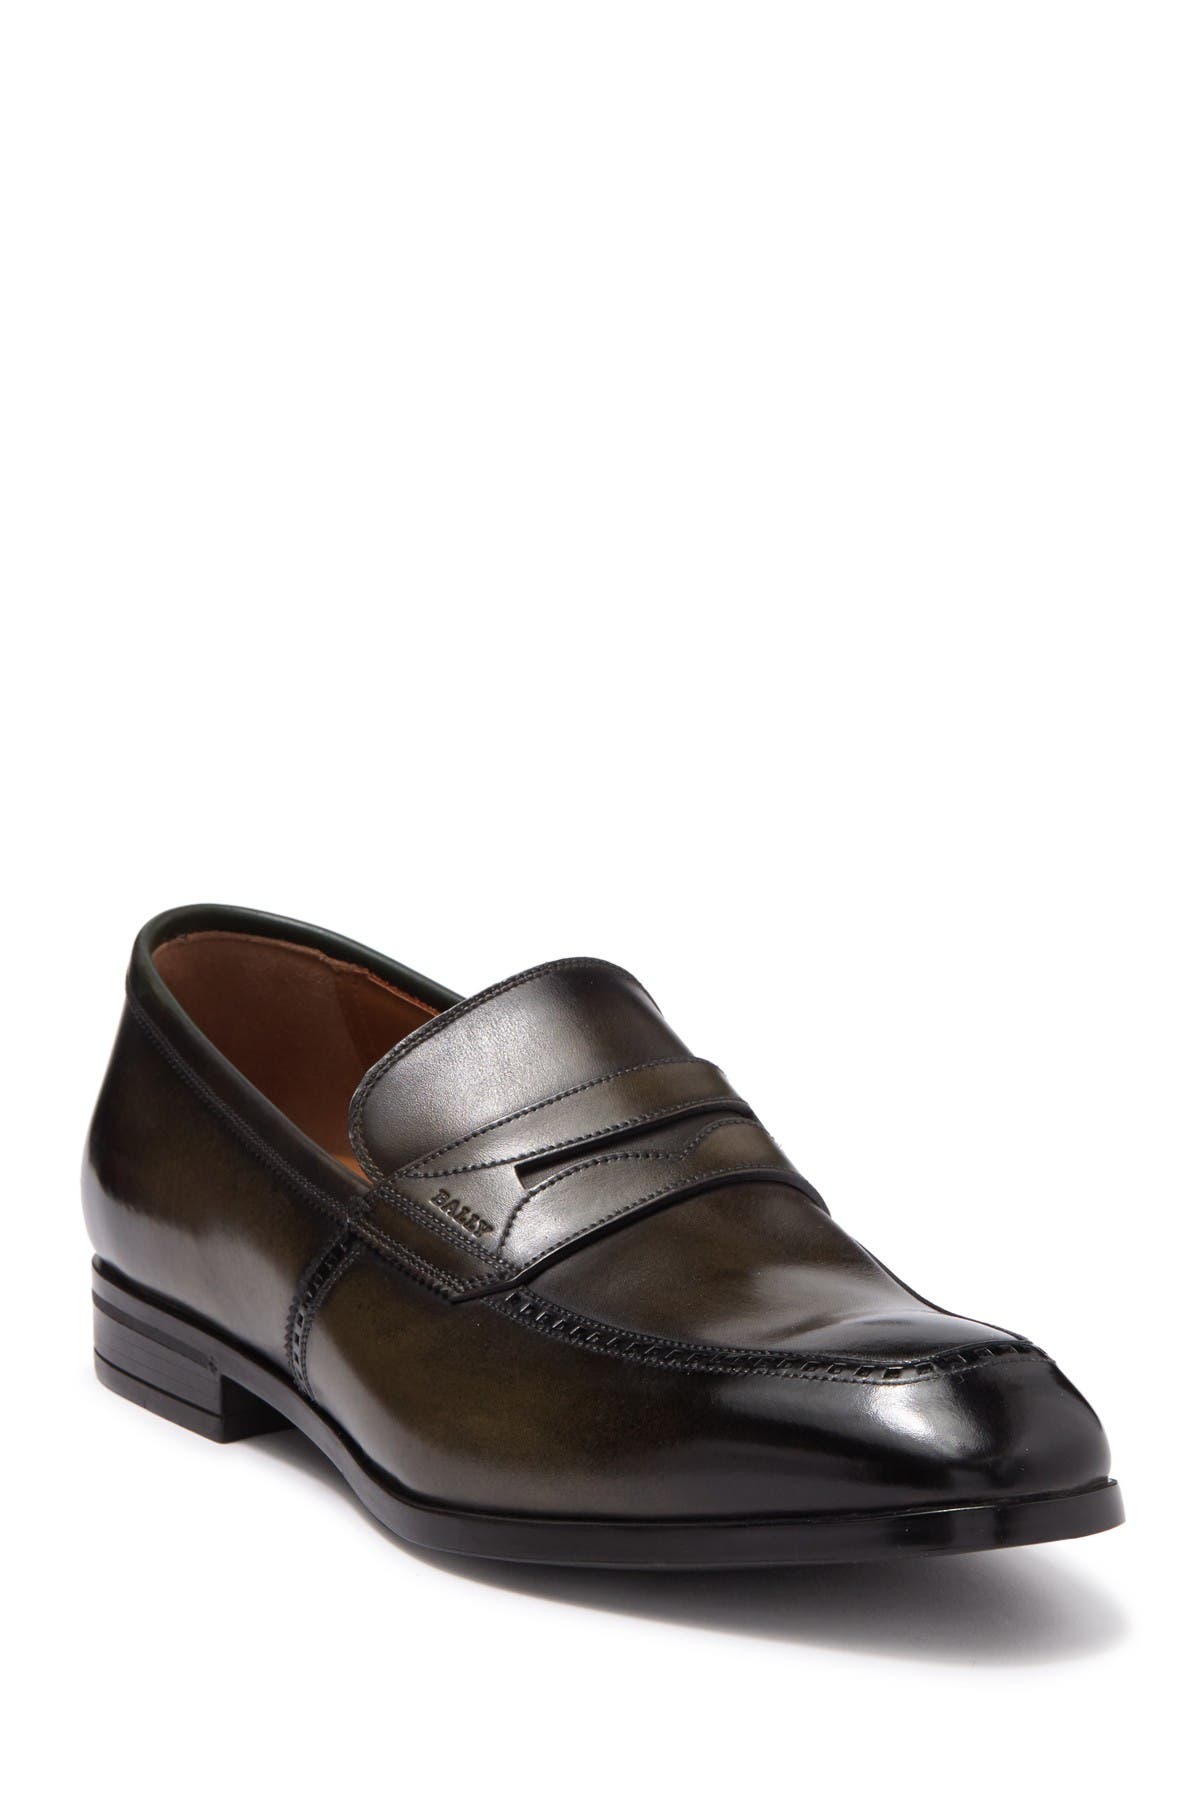 BALLY | Larso Leather Loafer 